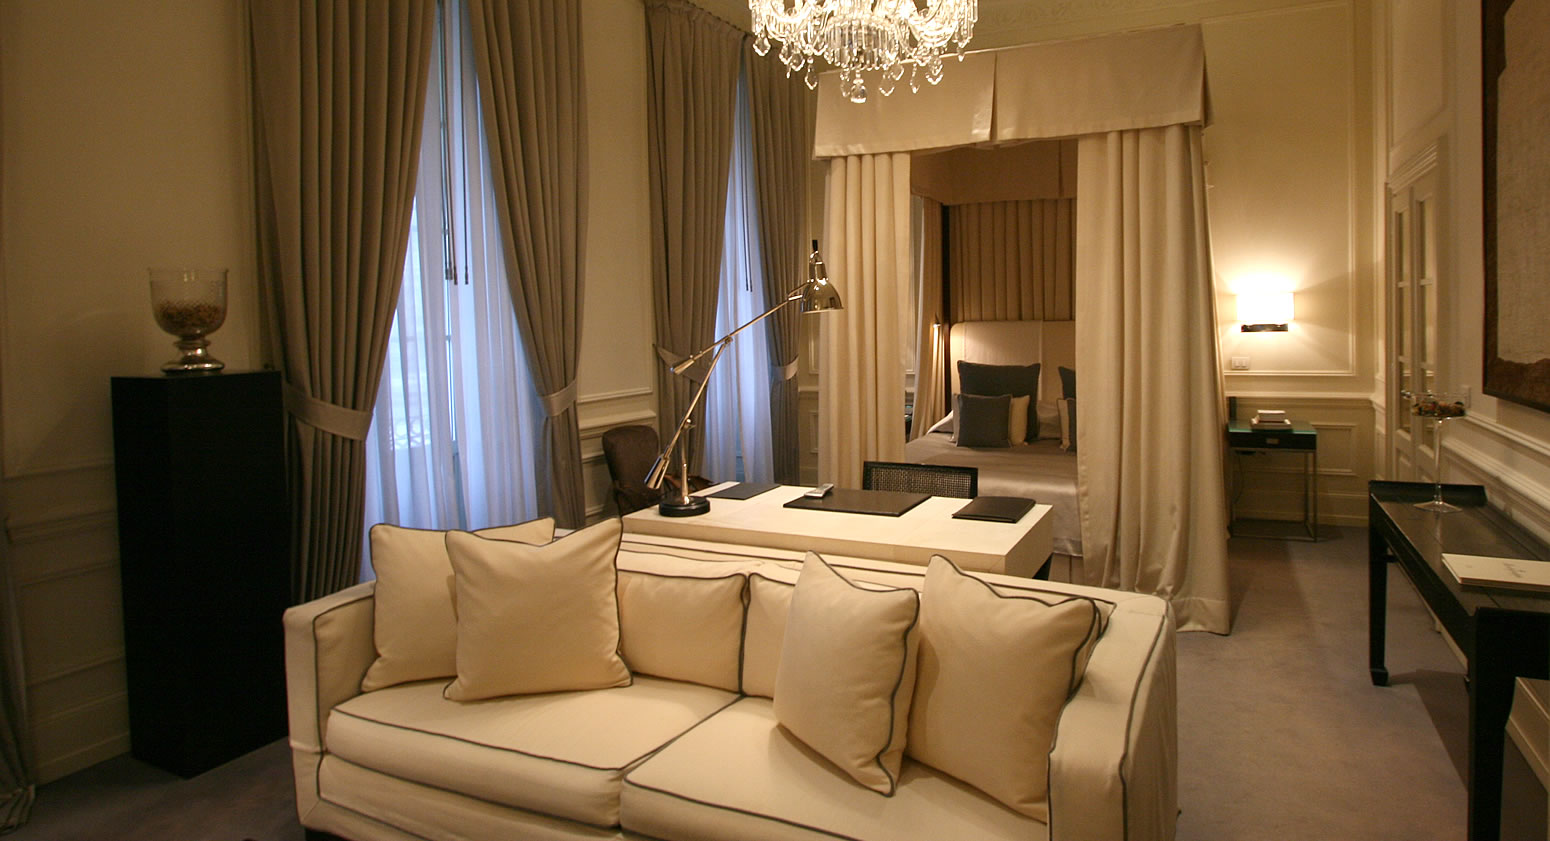 Luscious travel: JK Place hotel in Florence, Italy